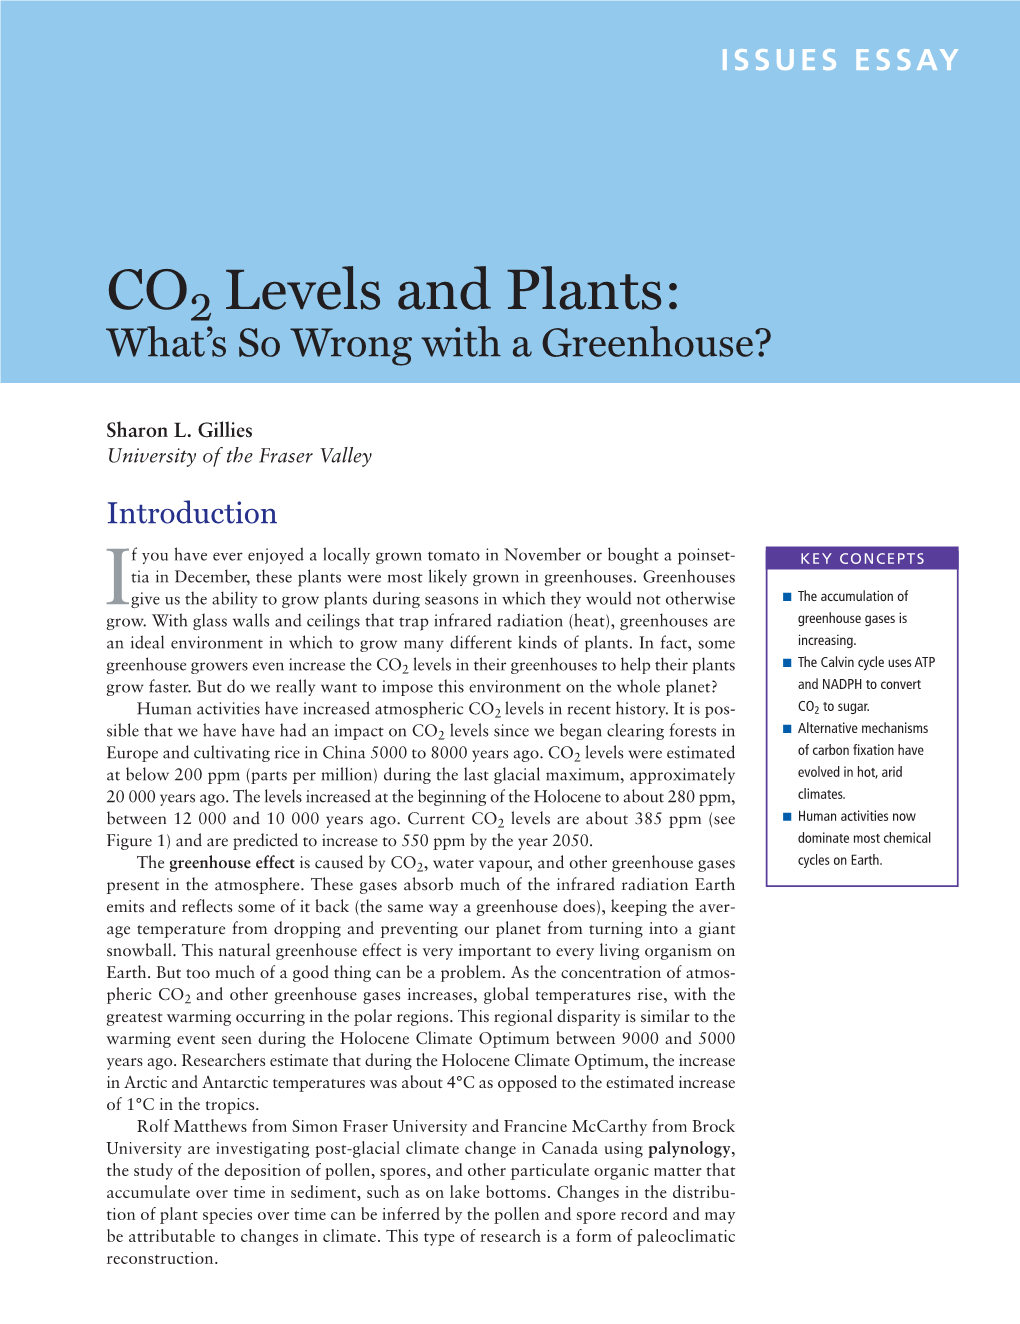 CO2 Levels and Plants: What’S So Wrong with a Greenhouse?